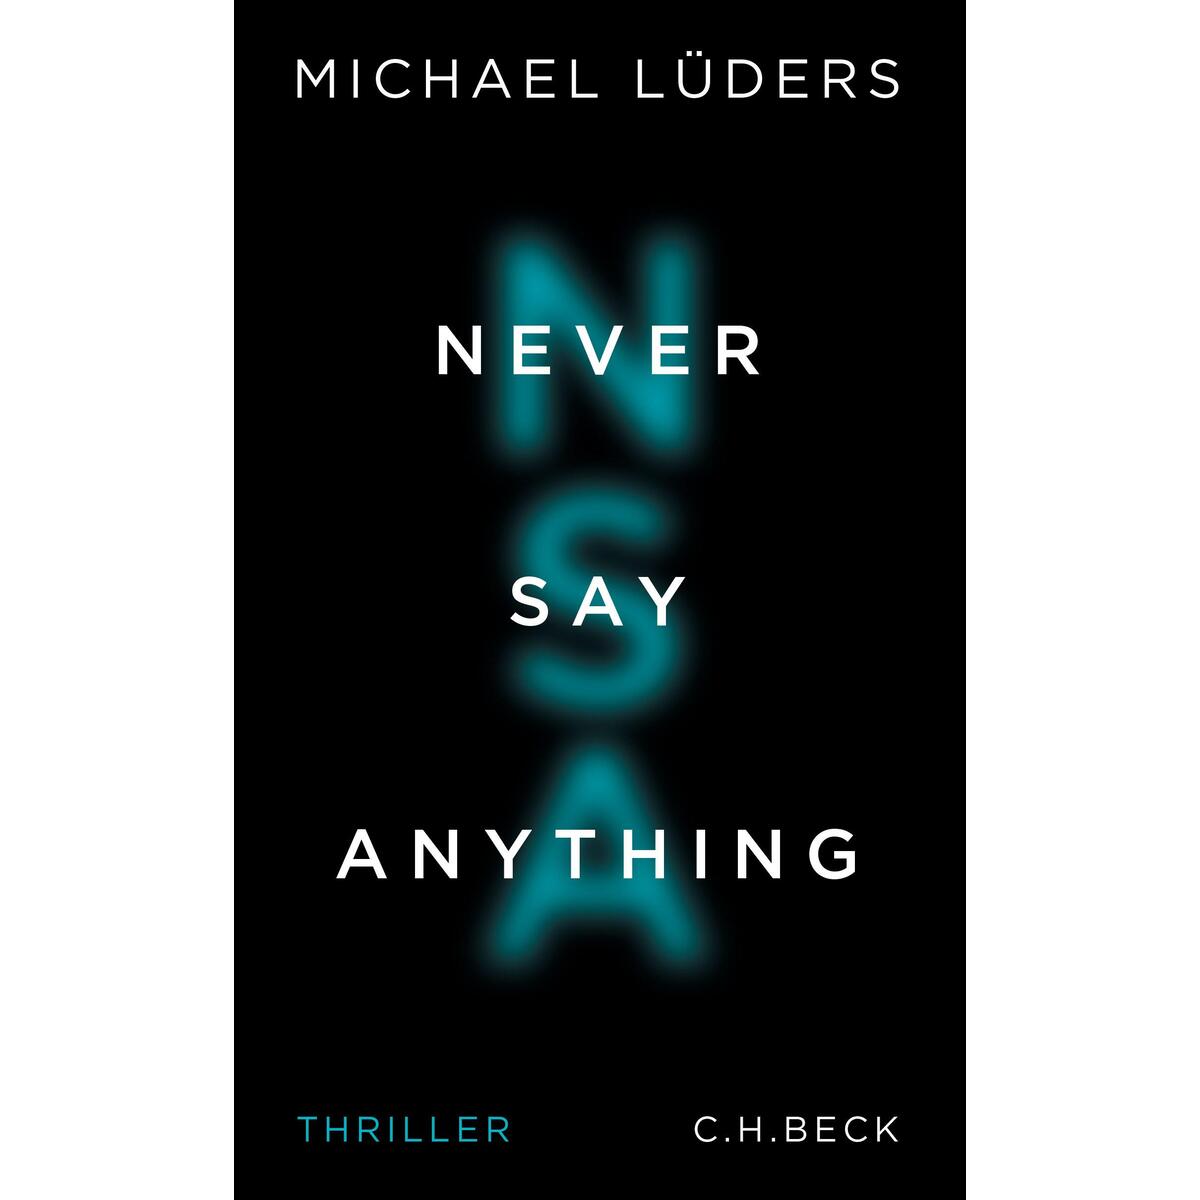 Never Say Anything von C.H. Beck